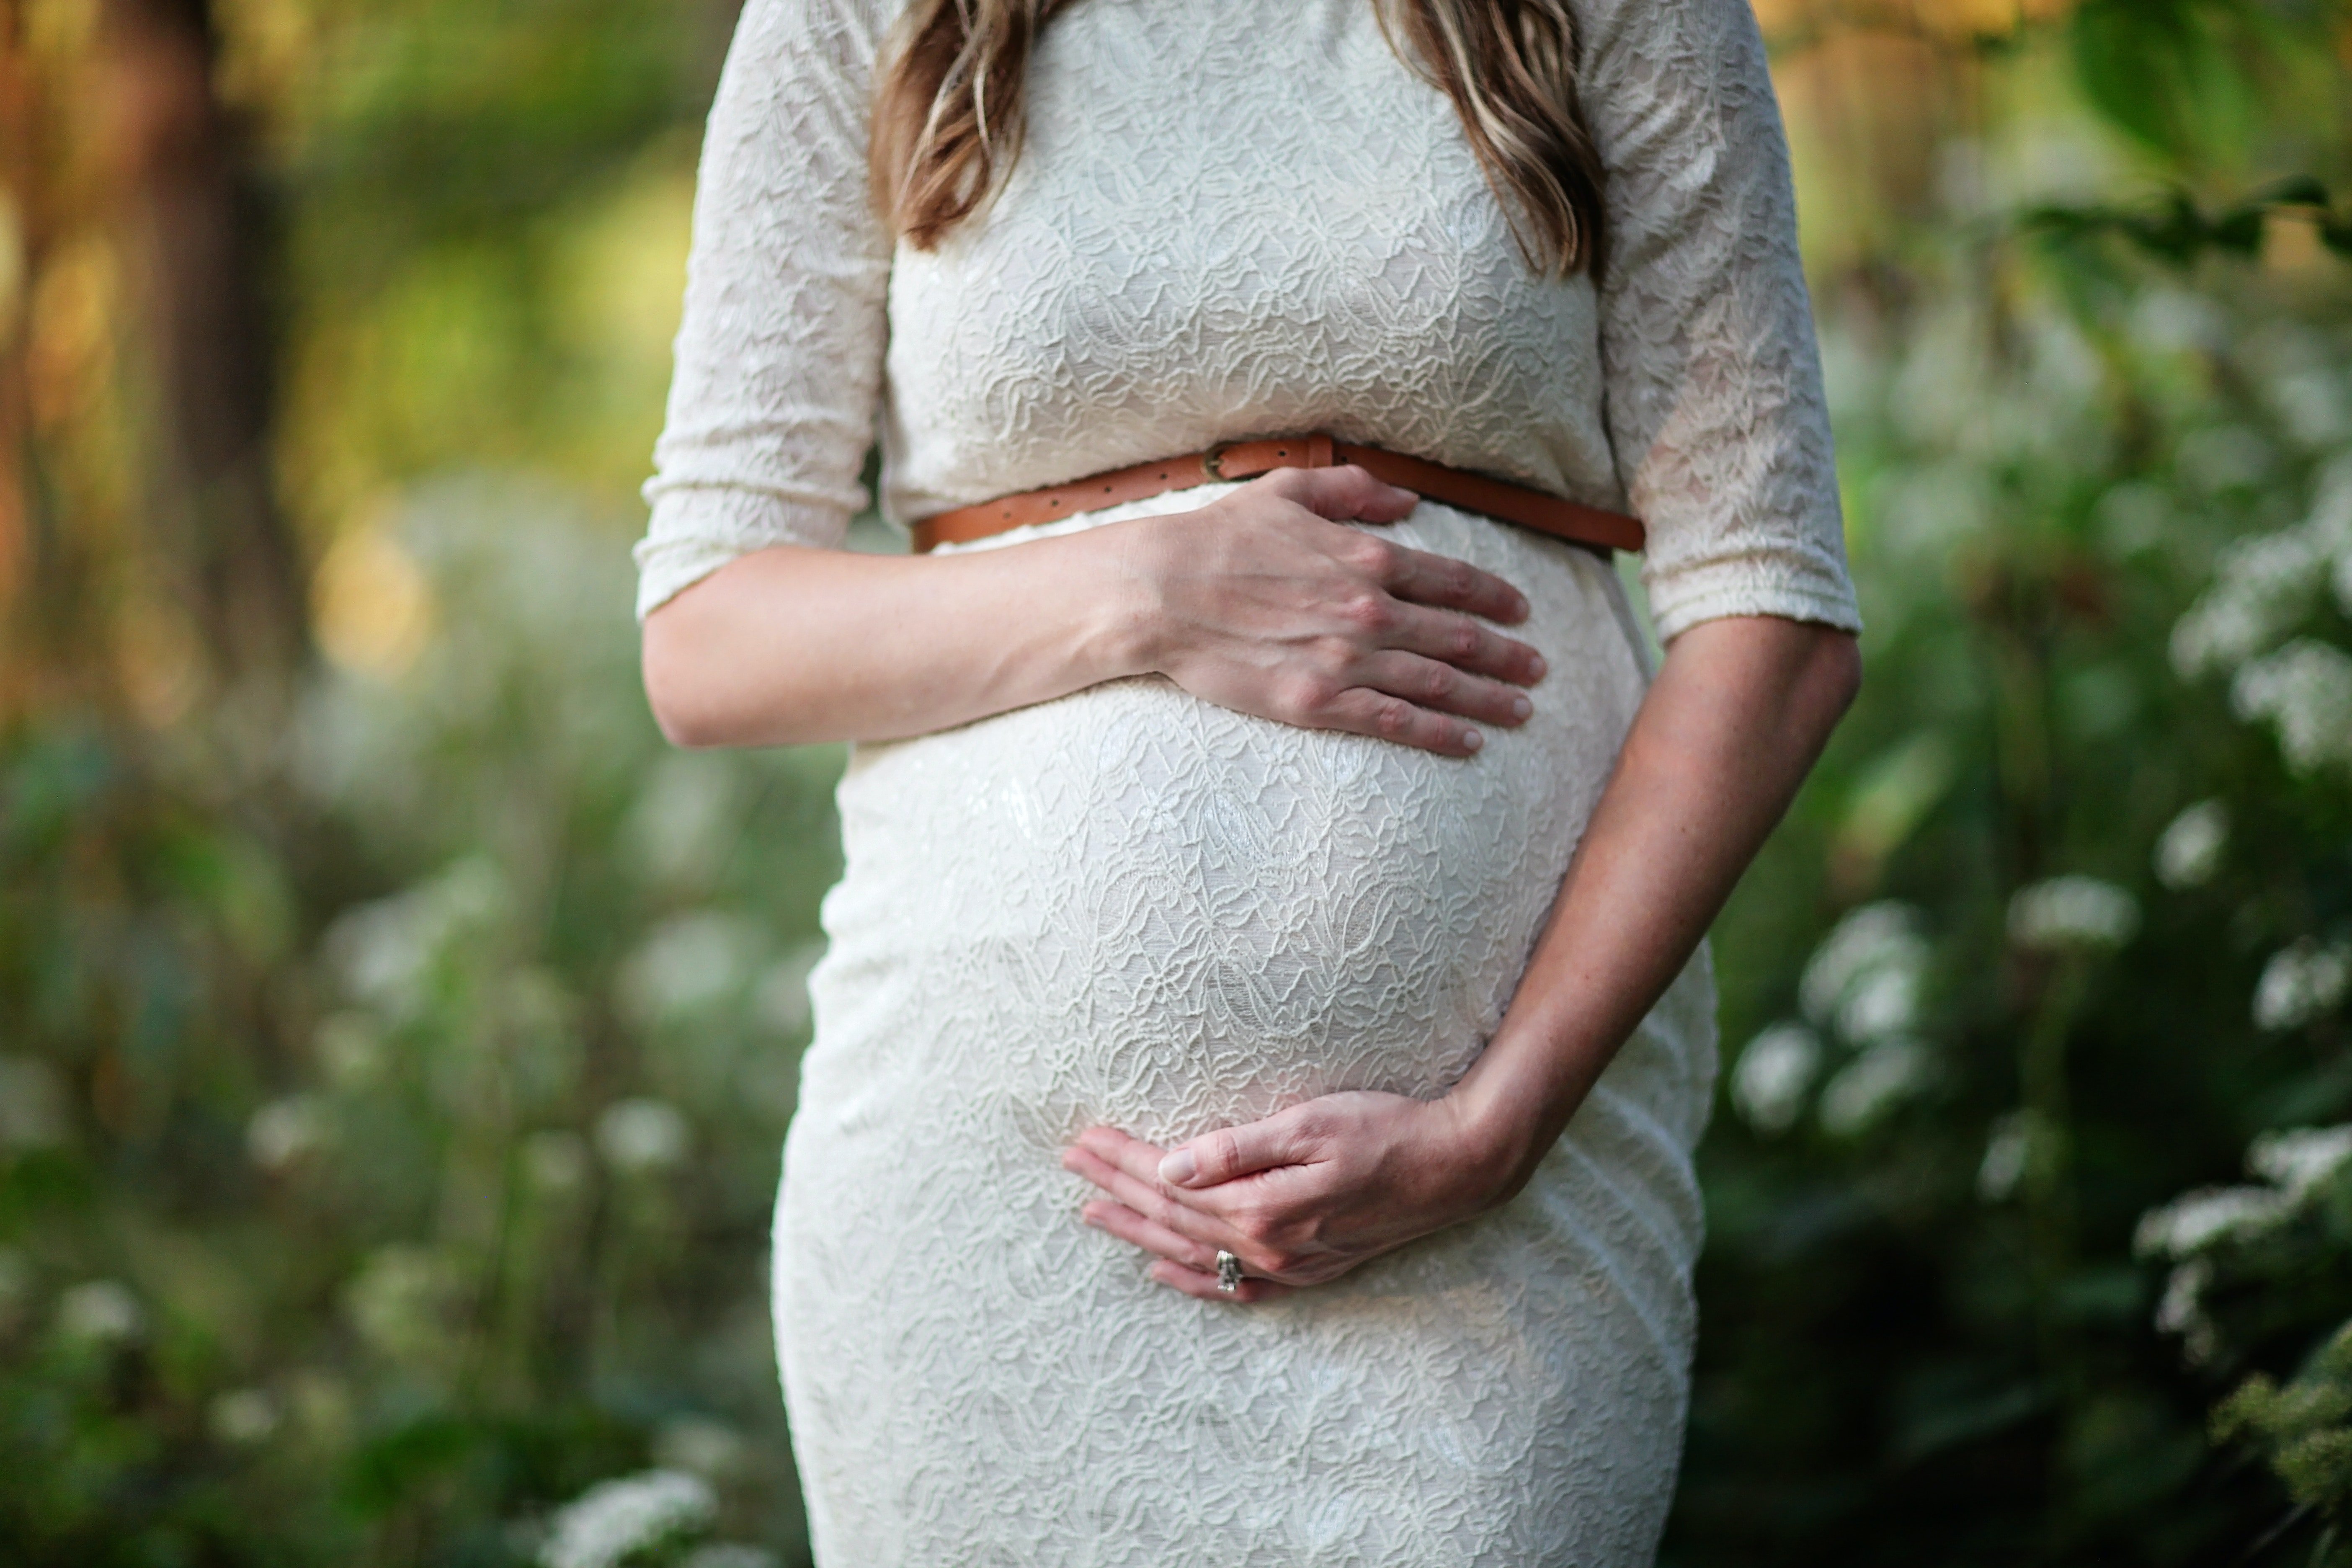 Wendy was 7 months pregnant | Photo: Pexels